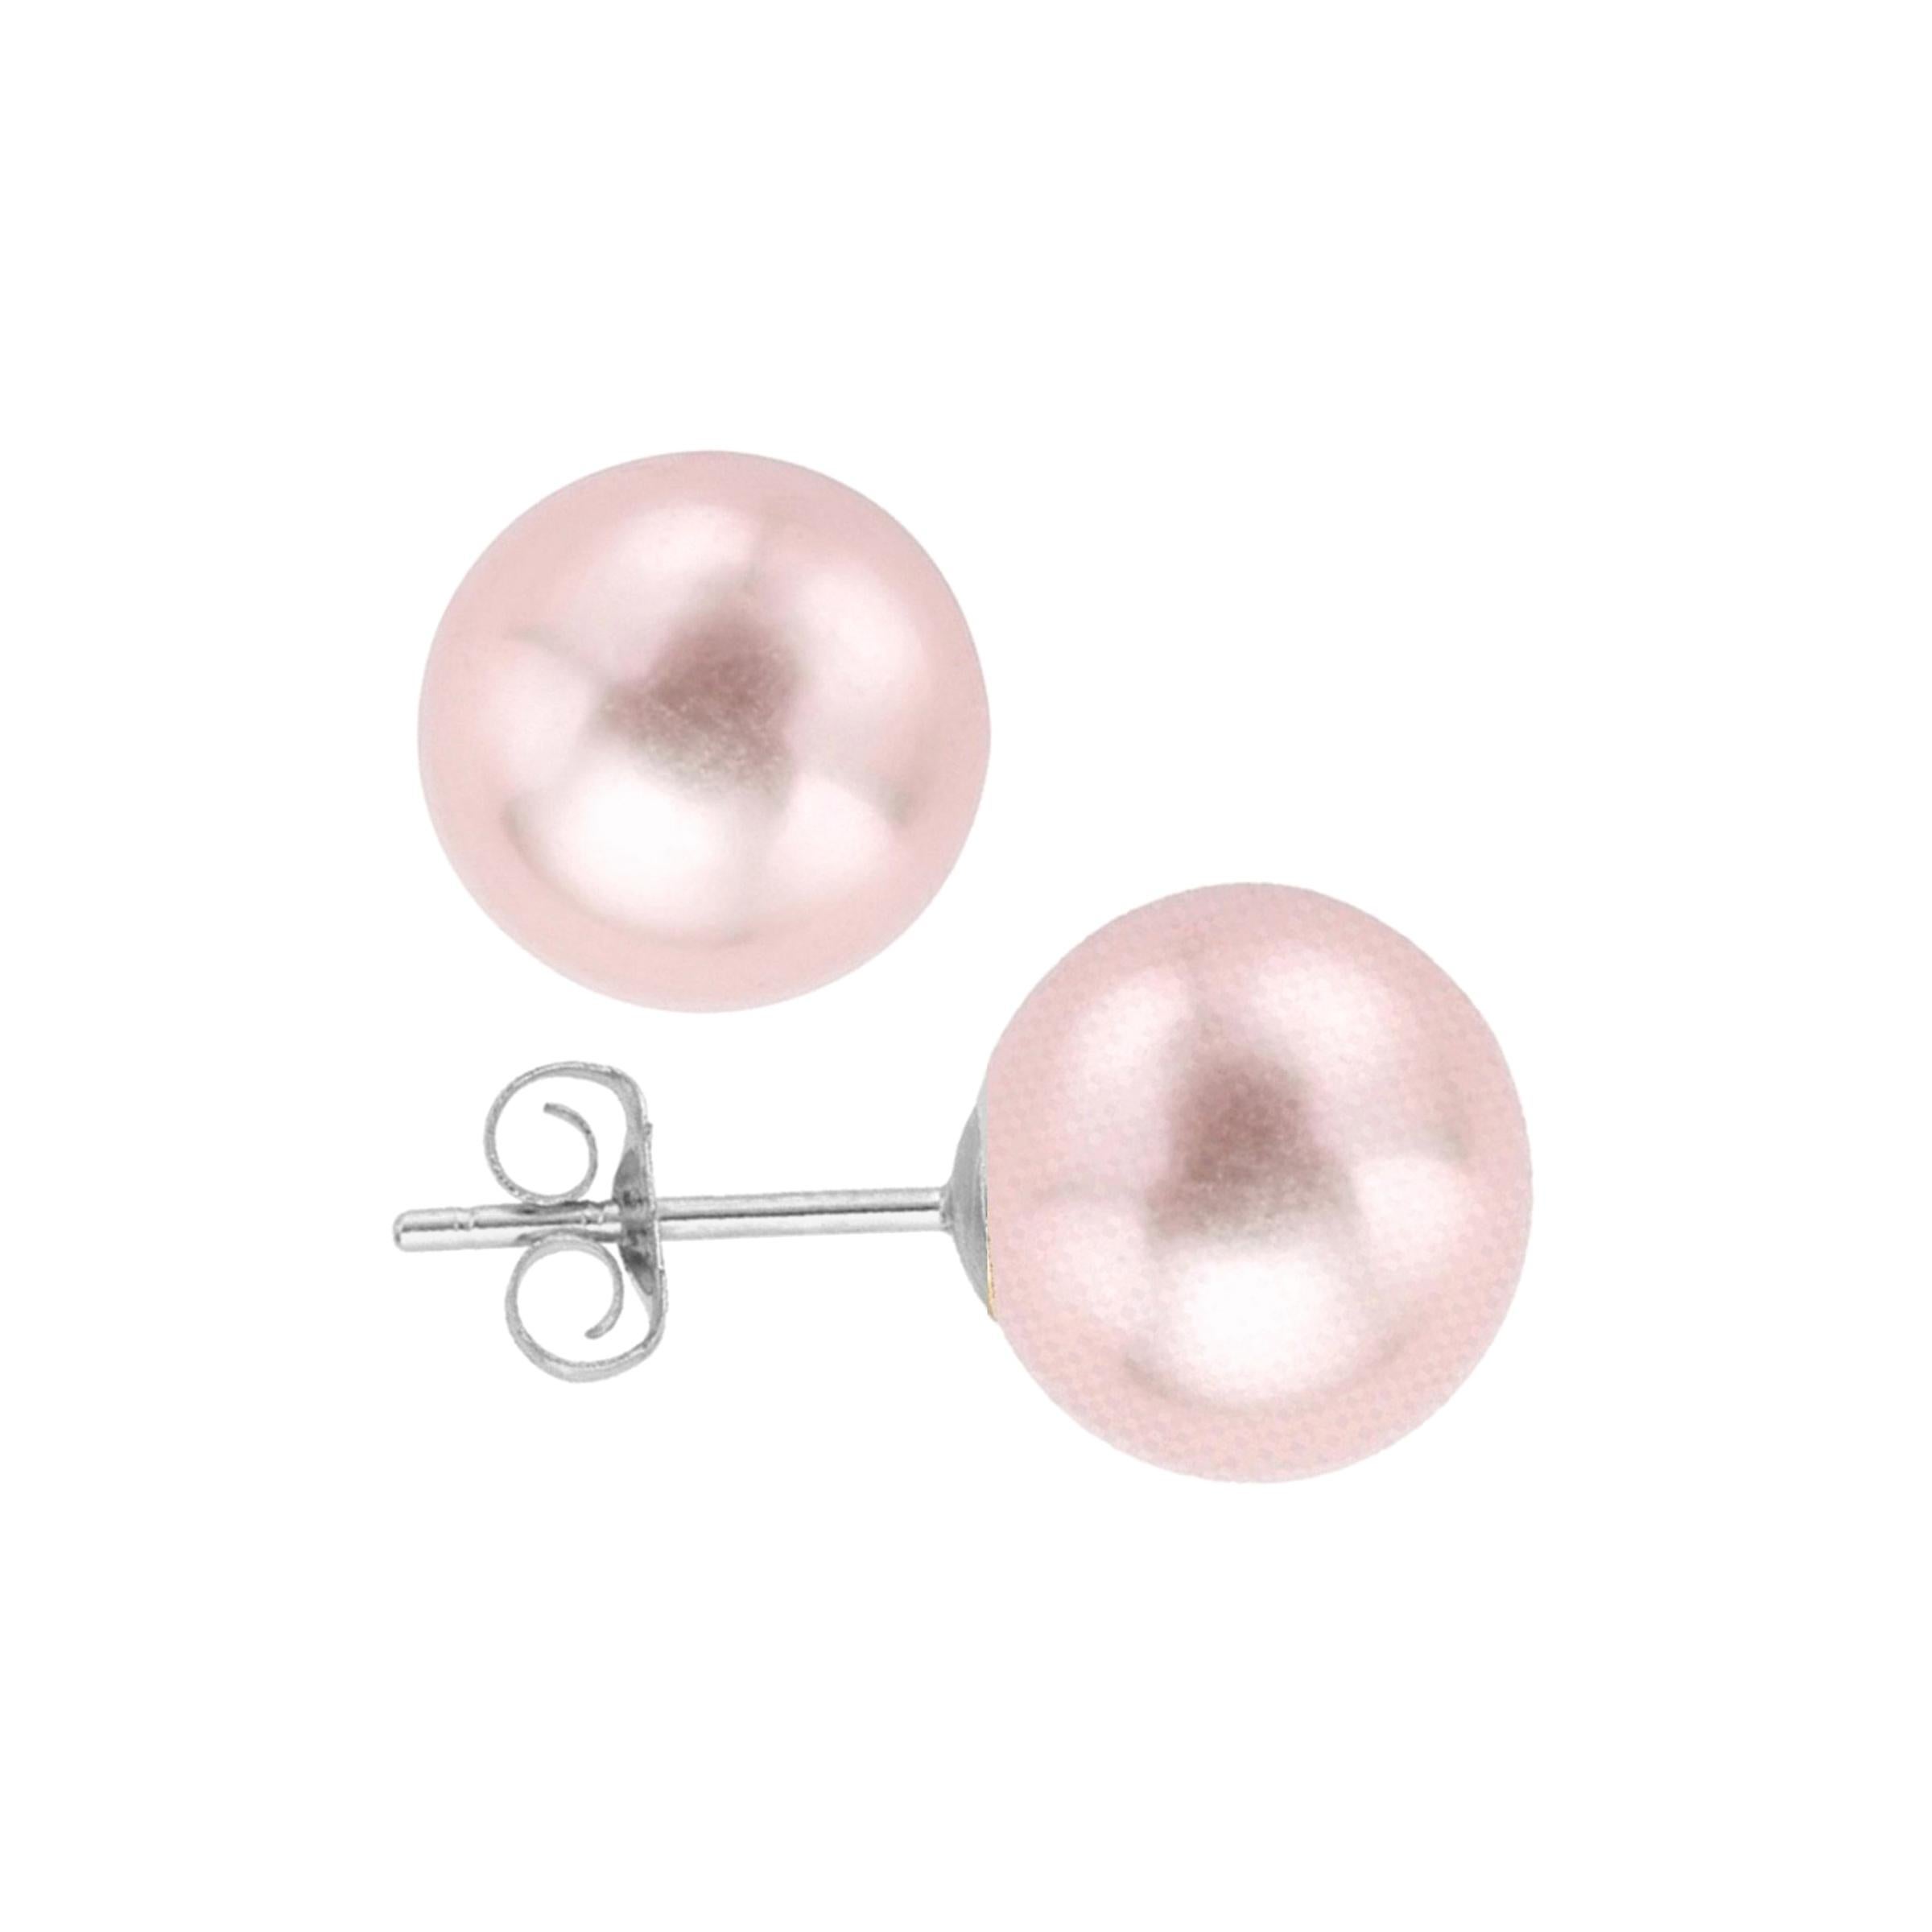 AAA Quality Pink Freshwater Cultured Pearl Earring Stud on 14 Karat White Gold For Sale